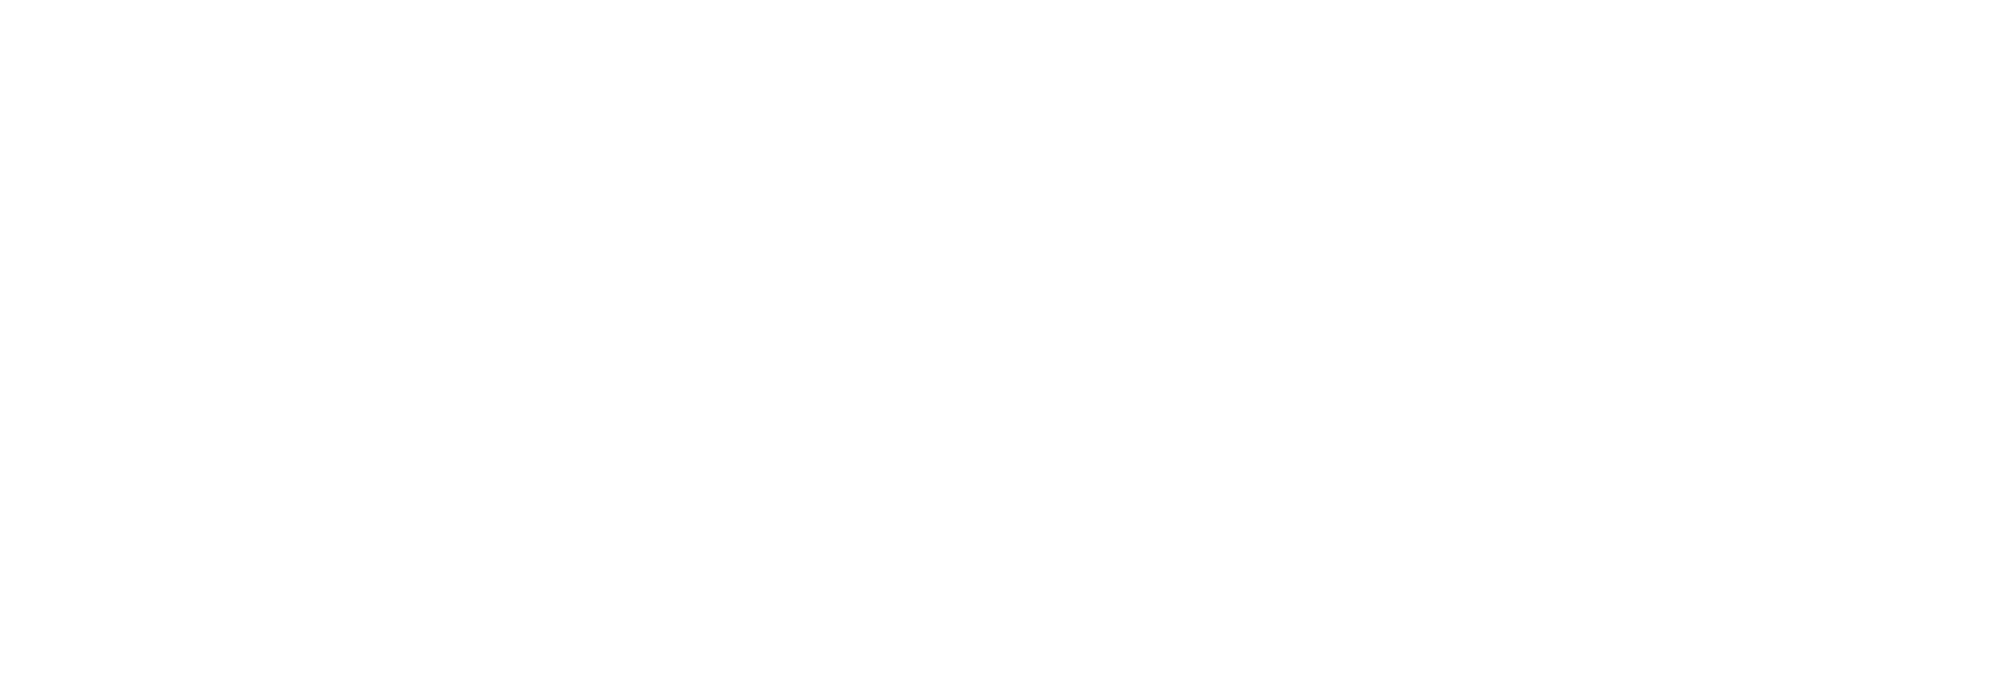 Optimo Consulting